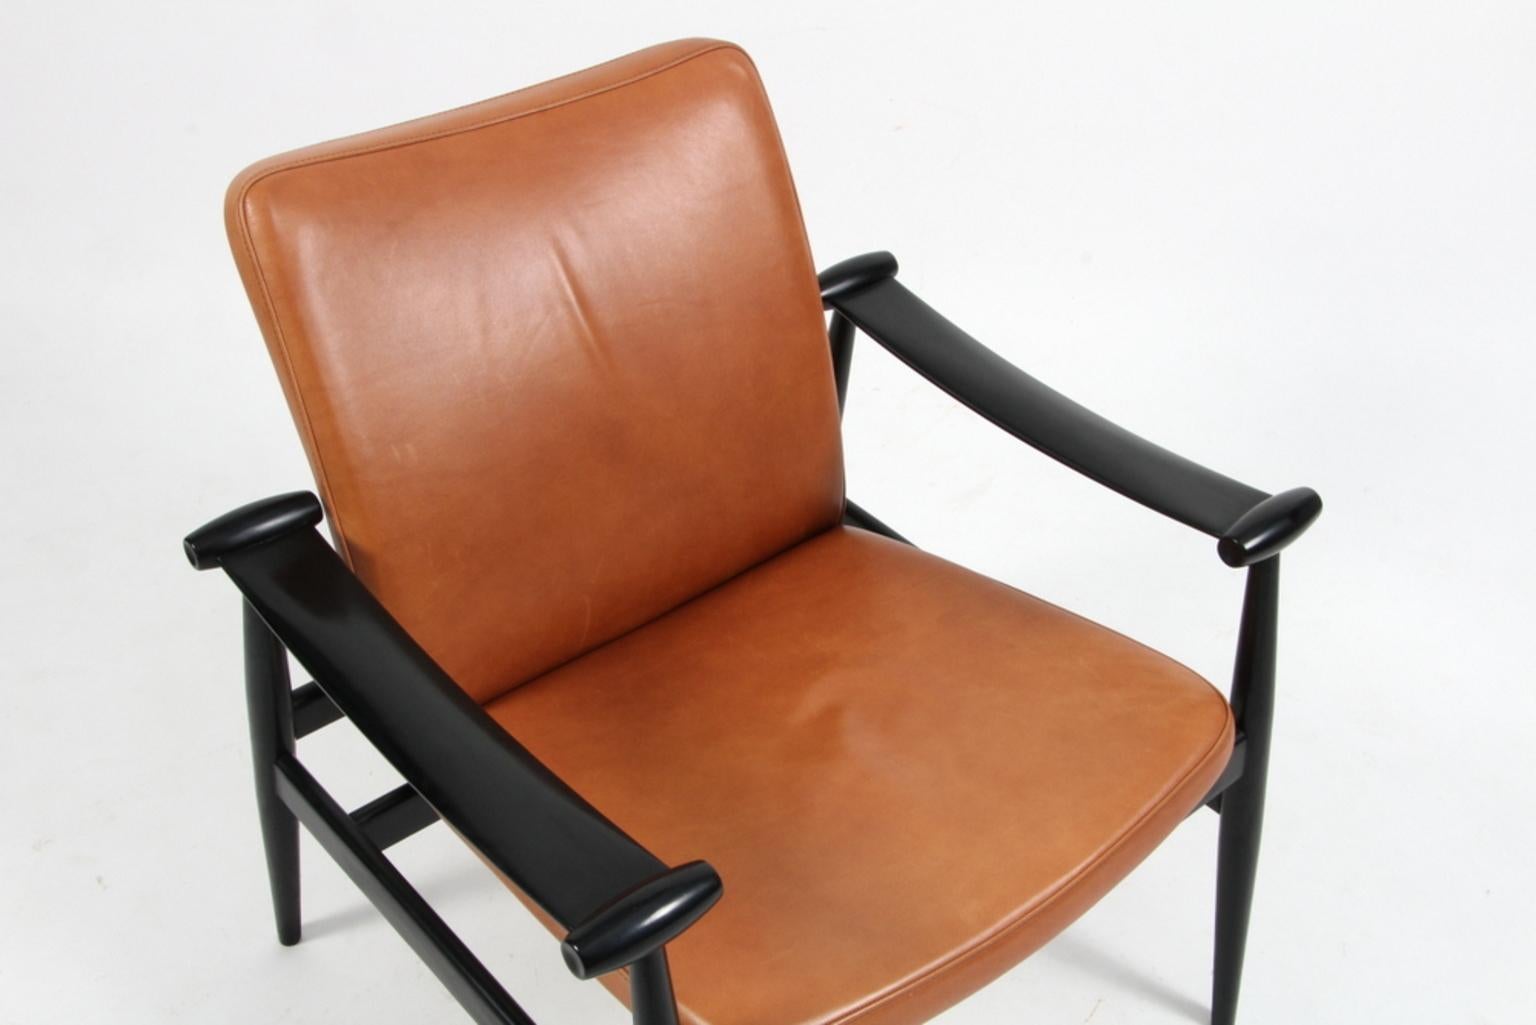 Finn Juhl lounge chair made in black lacquered wood and cognac semi aniline leather.

Model Spade stolen (FD133), made by France & Daverkosen.